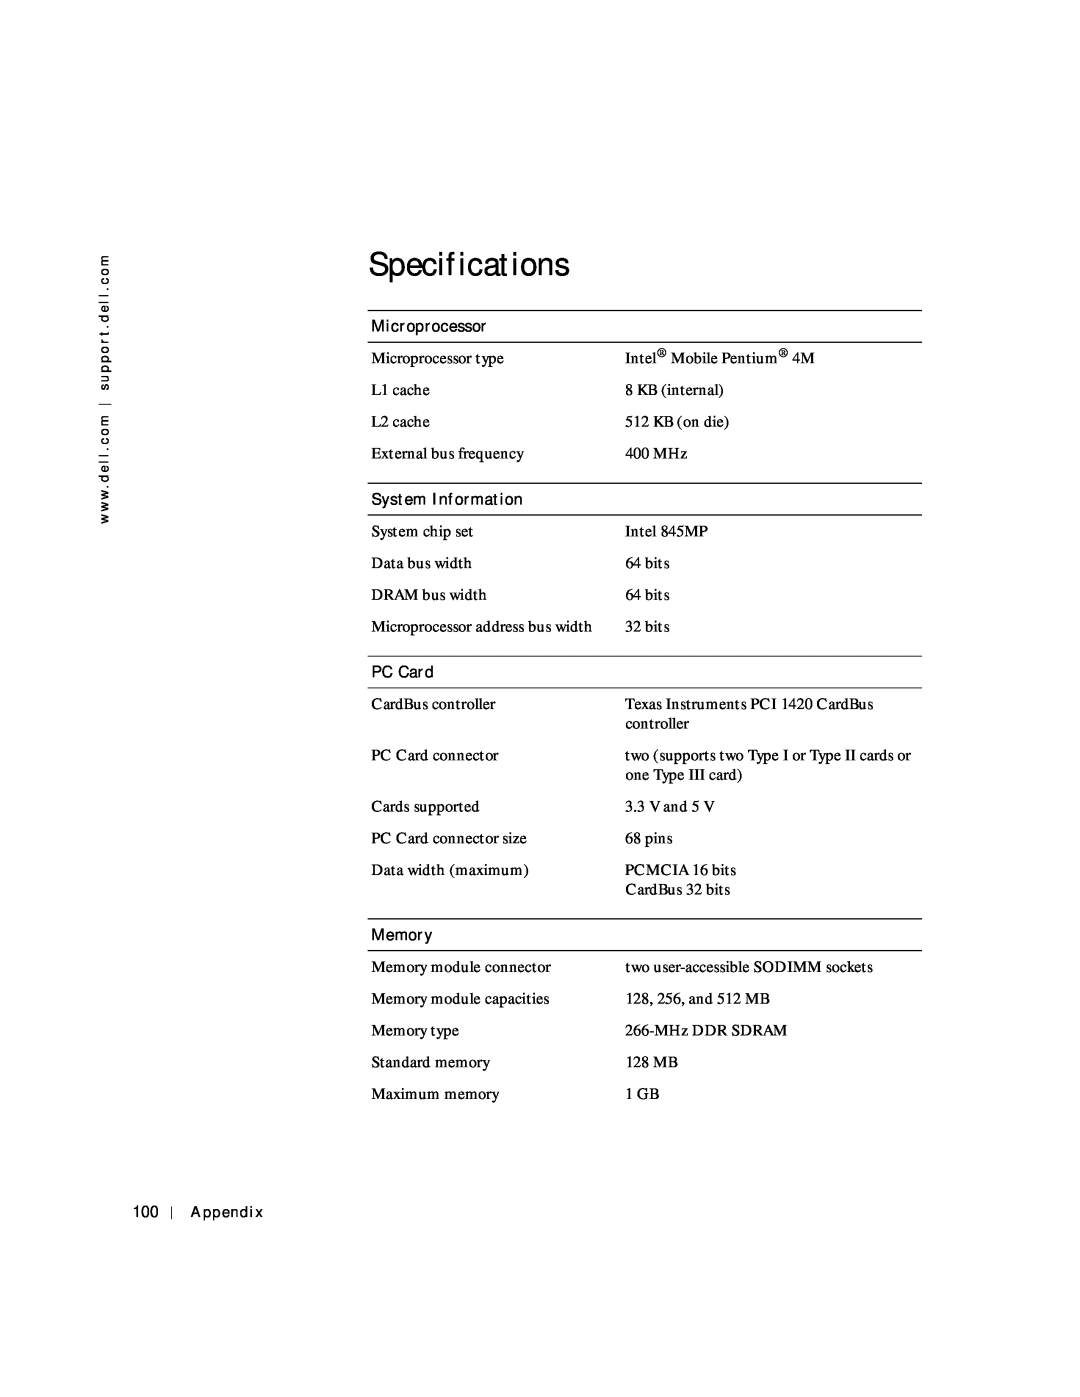 Dell 4150 owner manual Specifications, Appendix 